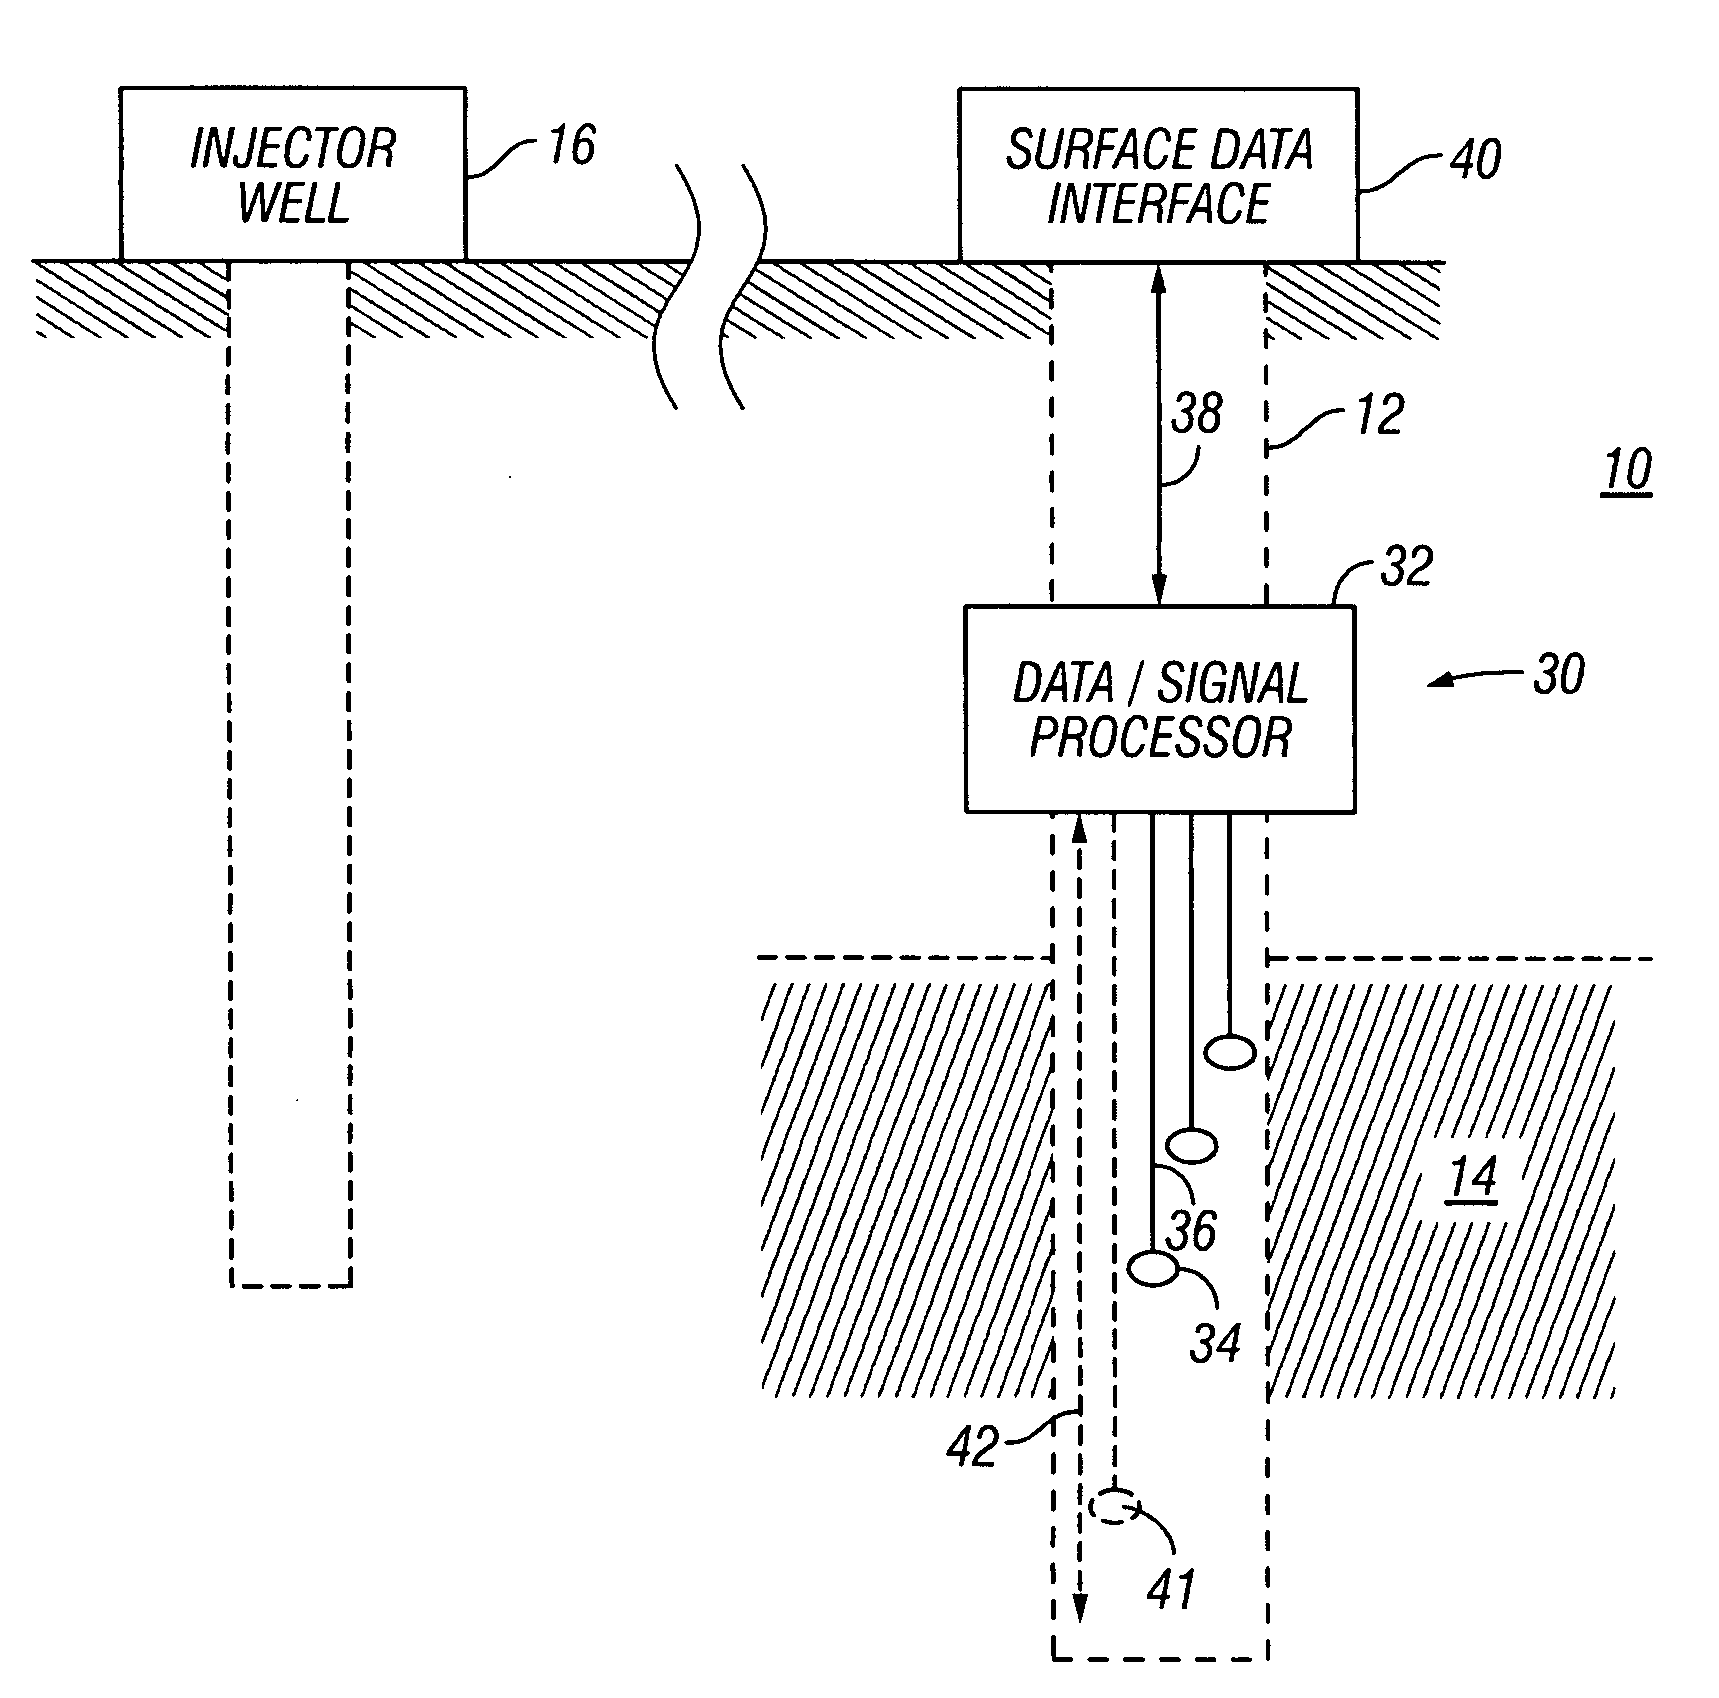 Systems and methods for acquiring data in thermal recovery oil wells